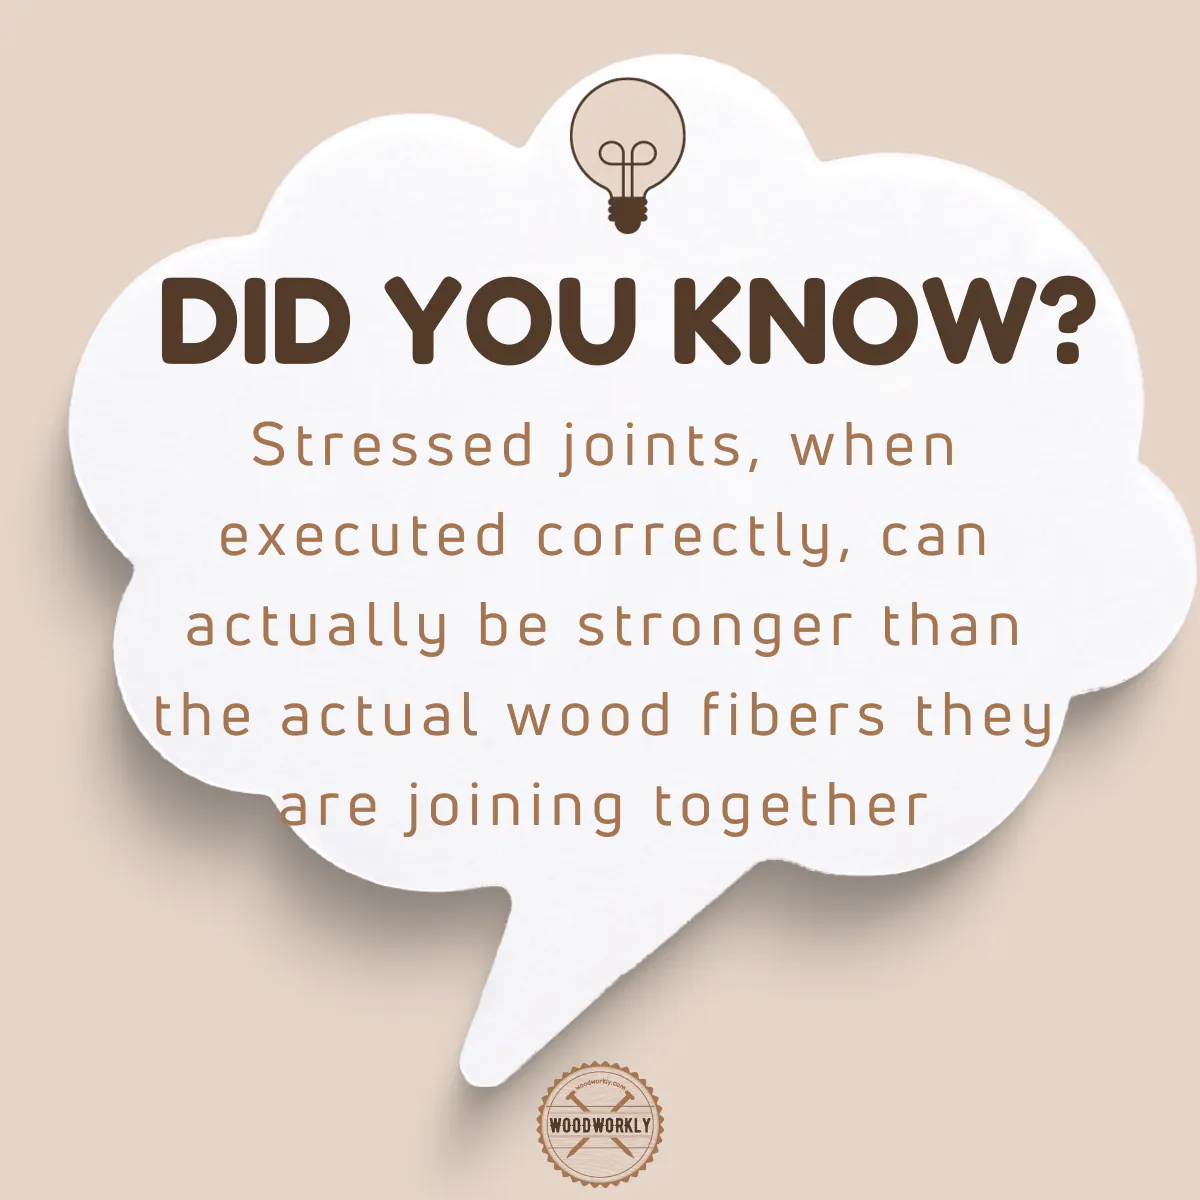 Did you know fact about stressed joints